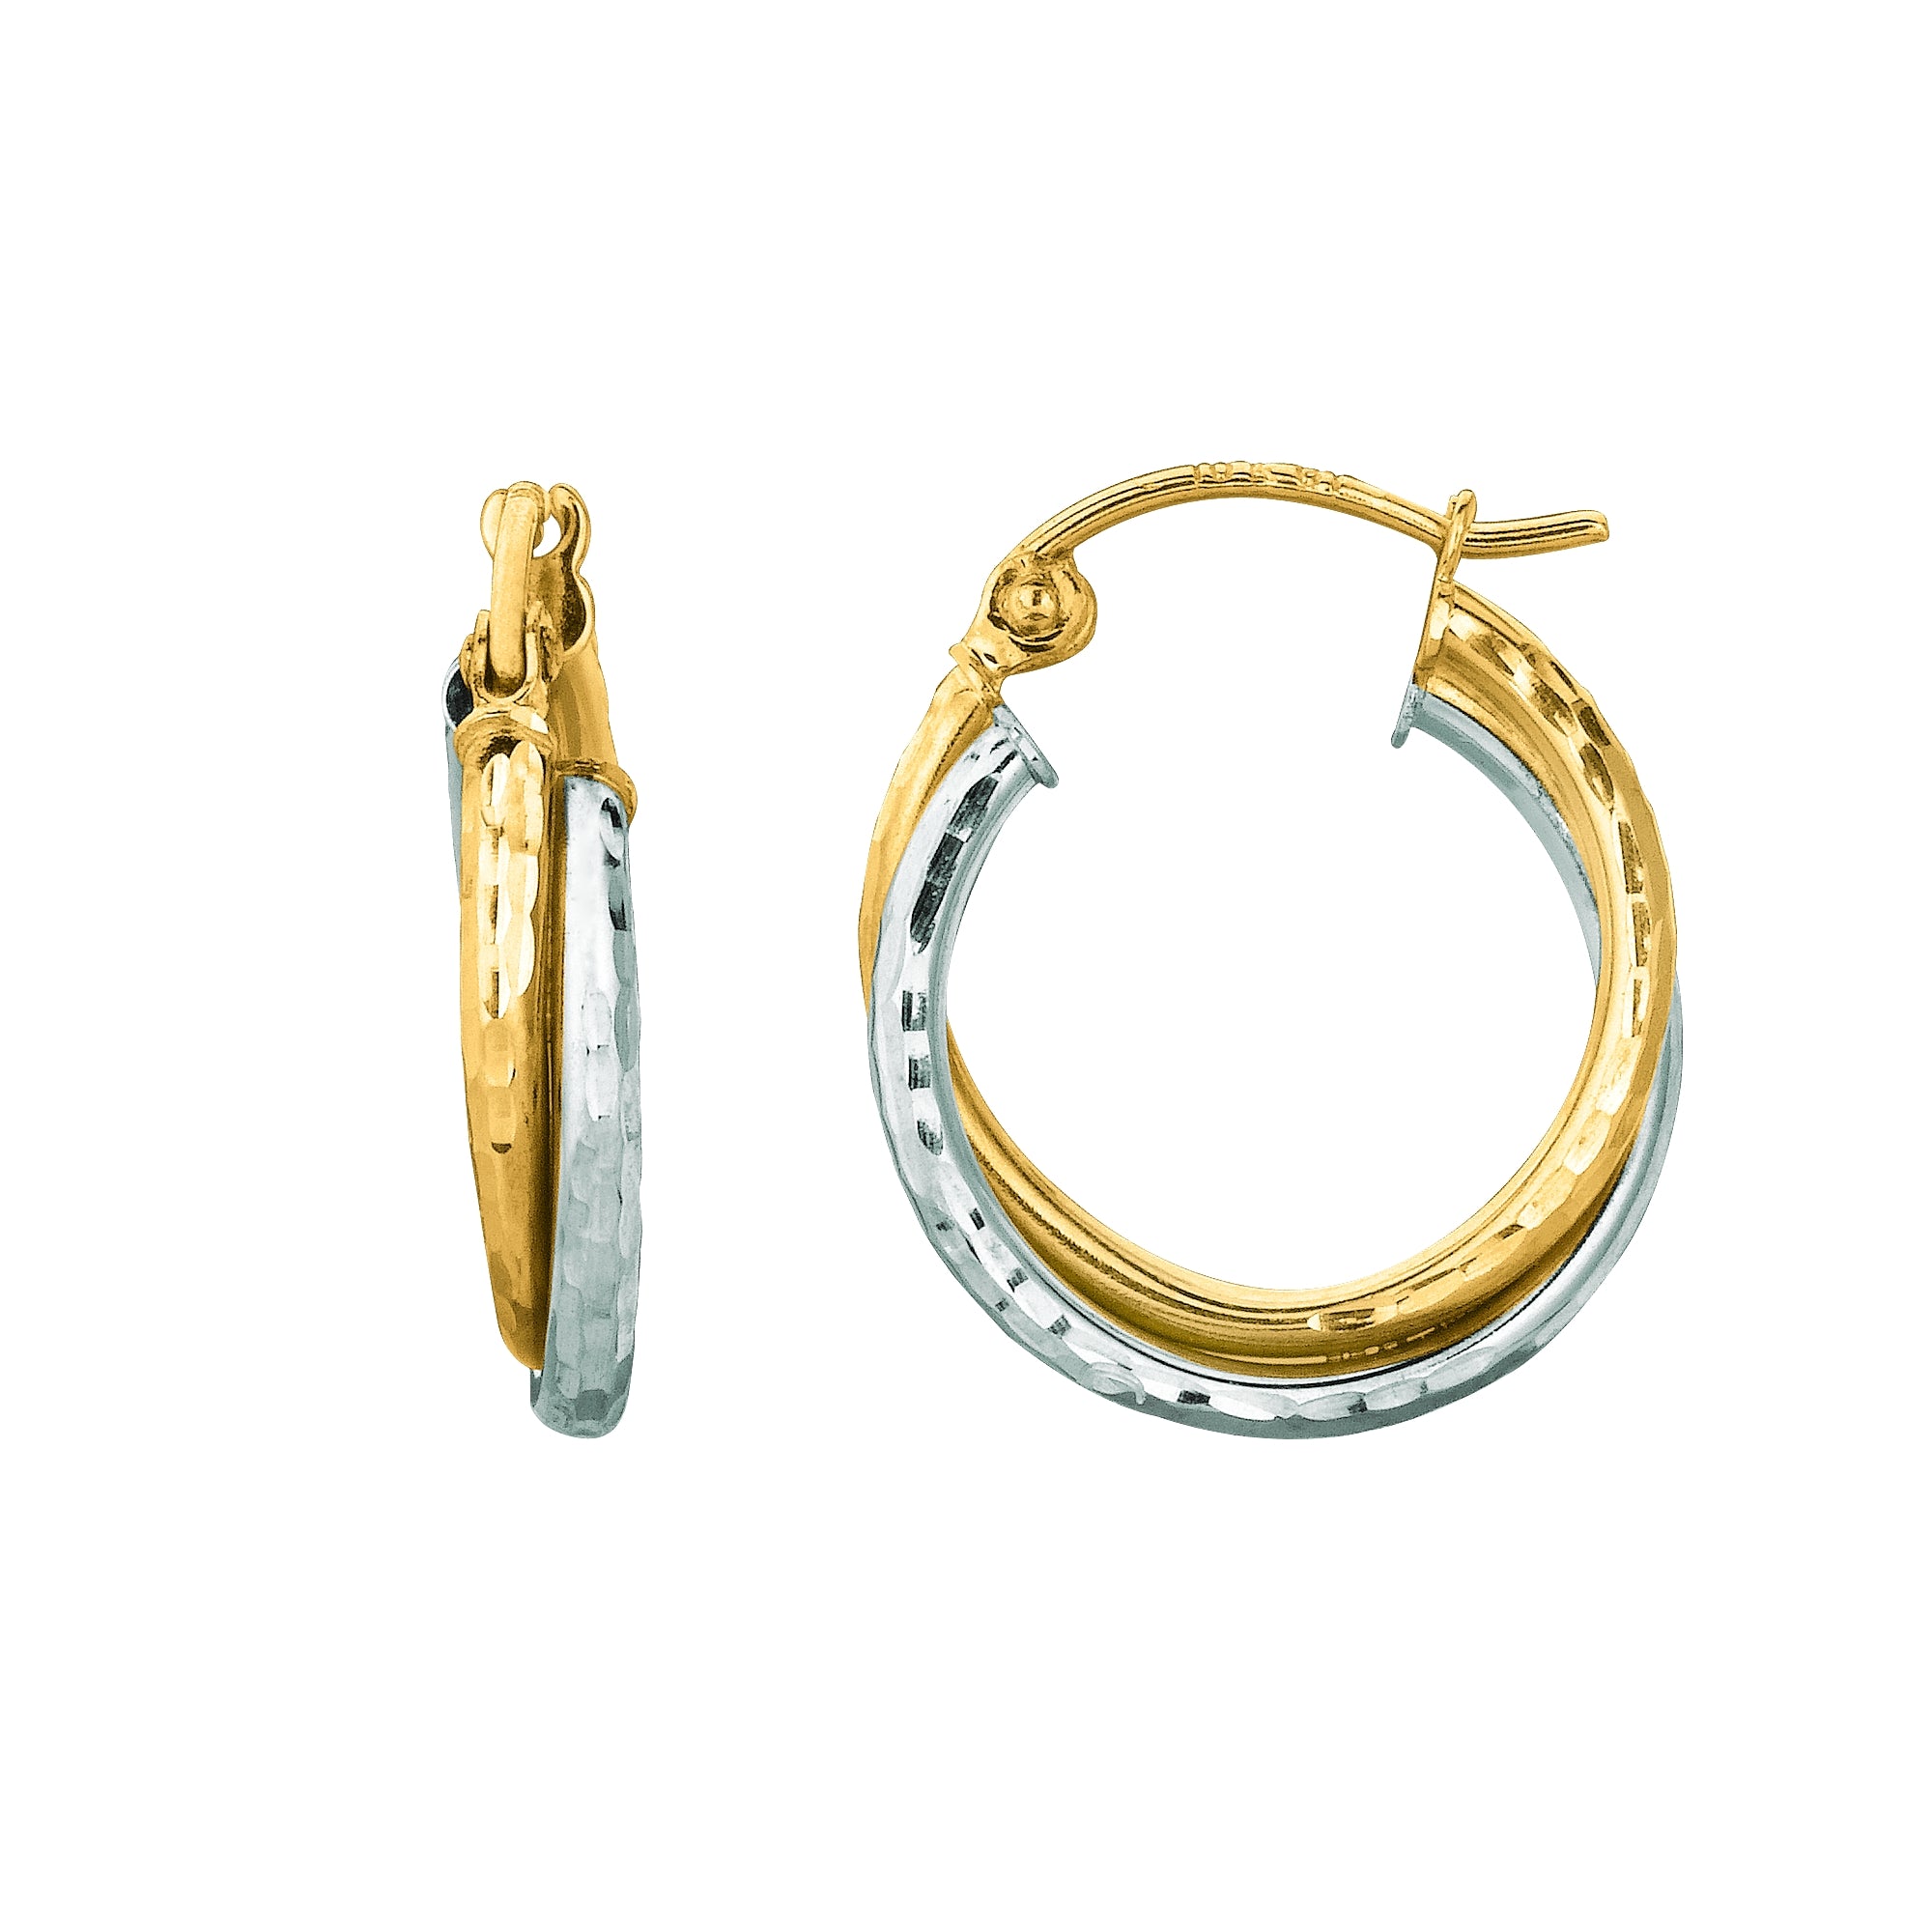 14K Yellow And White Gold Diamond Cut Double Row Hoop Earrings, Diameter 17mm fine designer jewelry for men and women